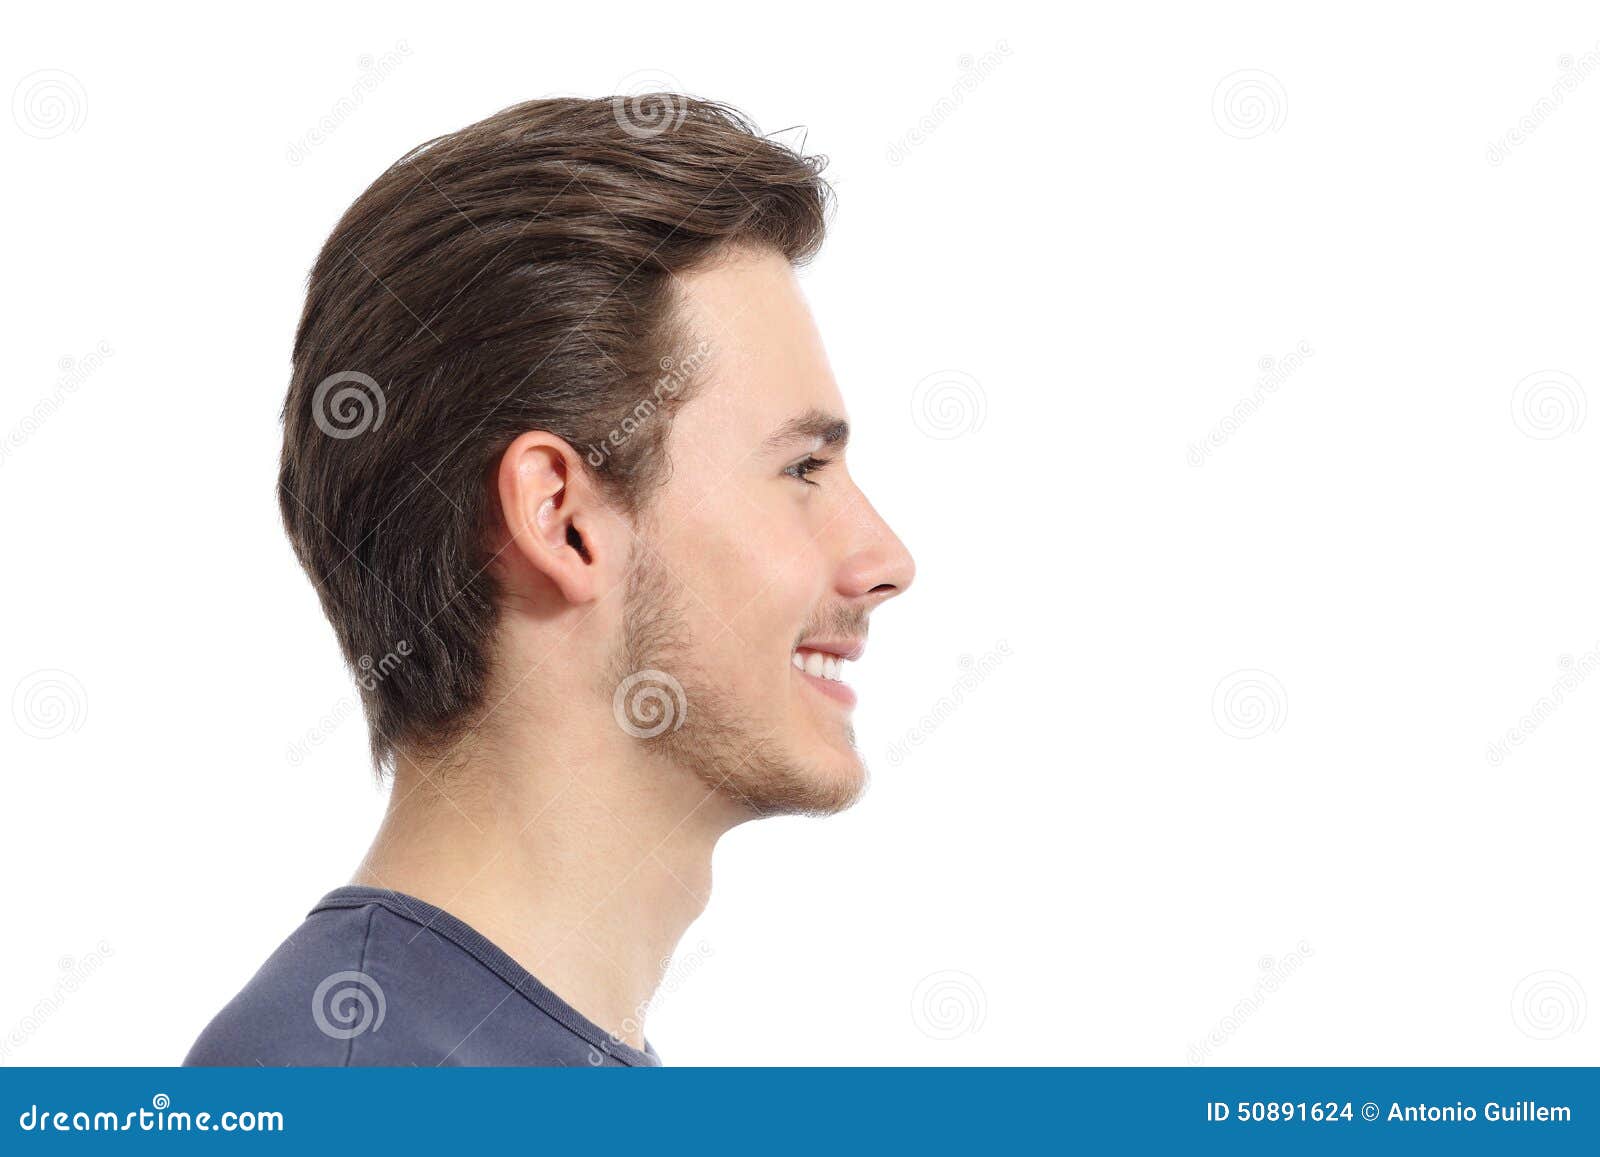 side-view-handsome-man-facial-portrait-isolated-white-background-50891624.jpg